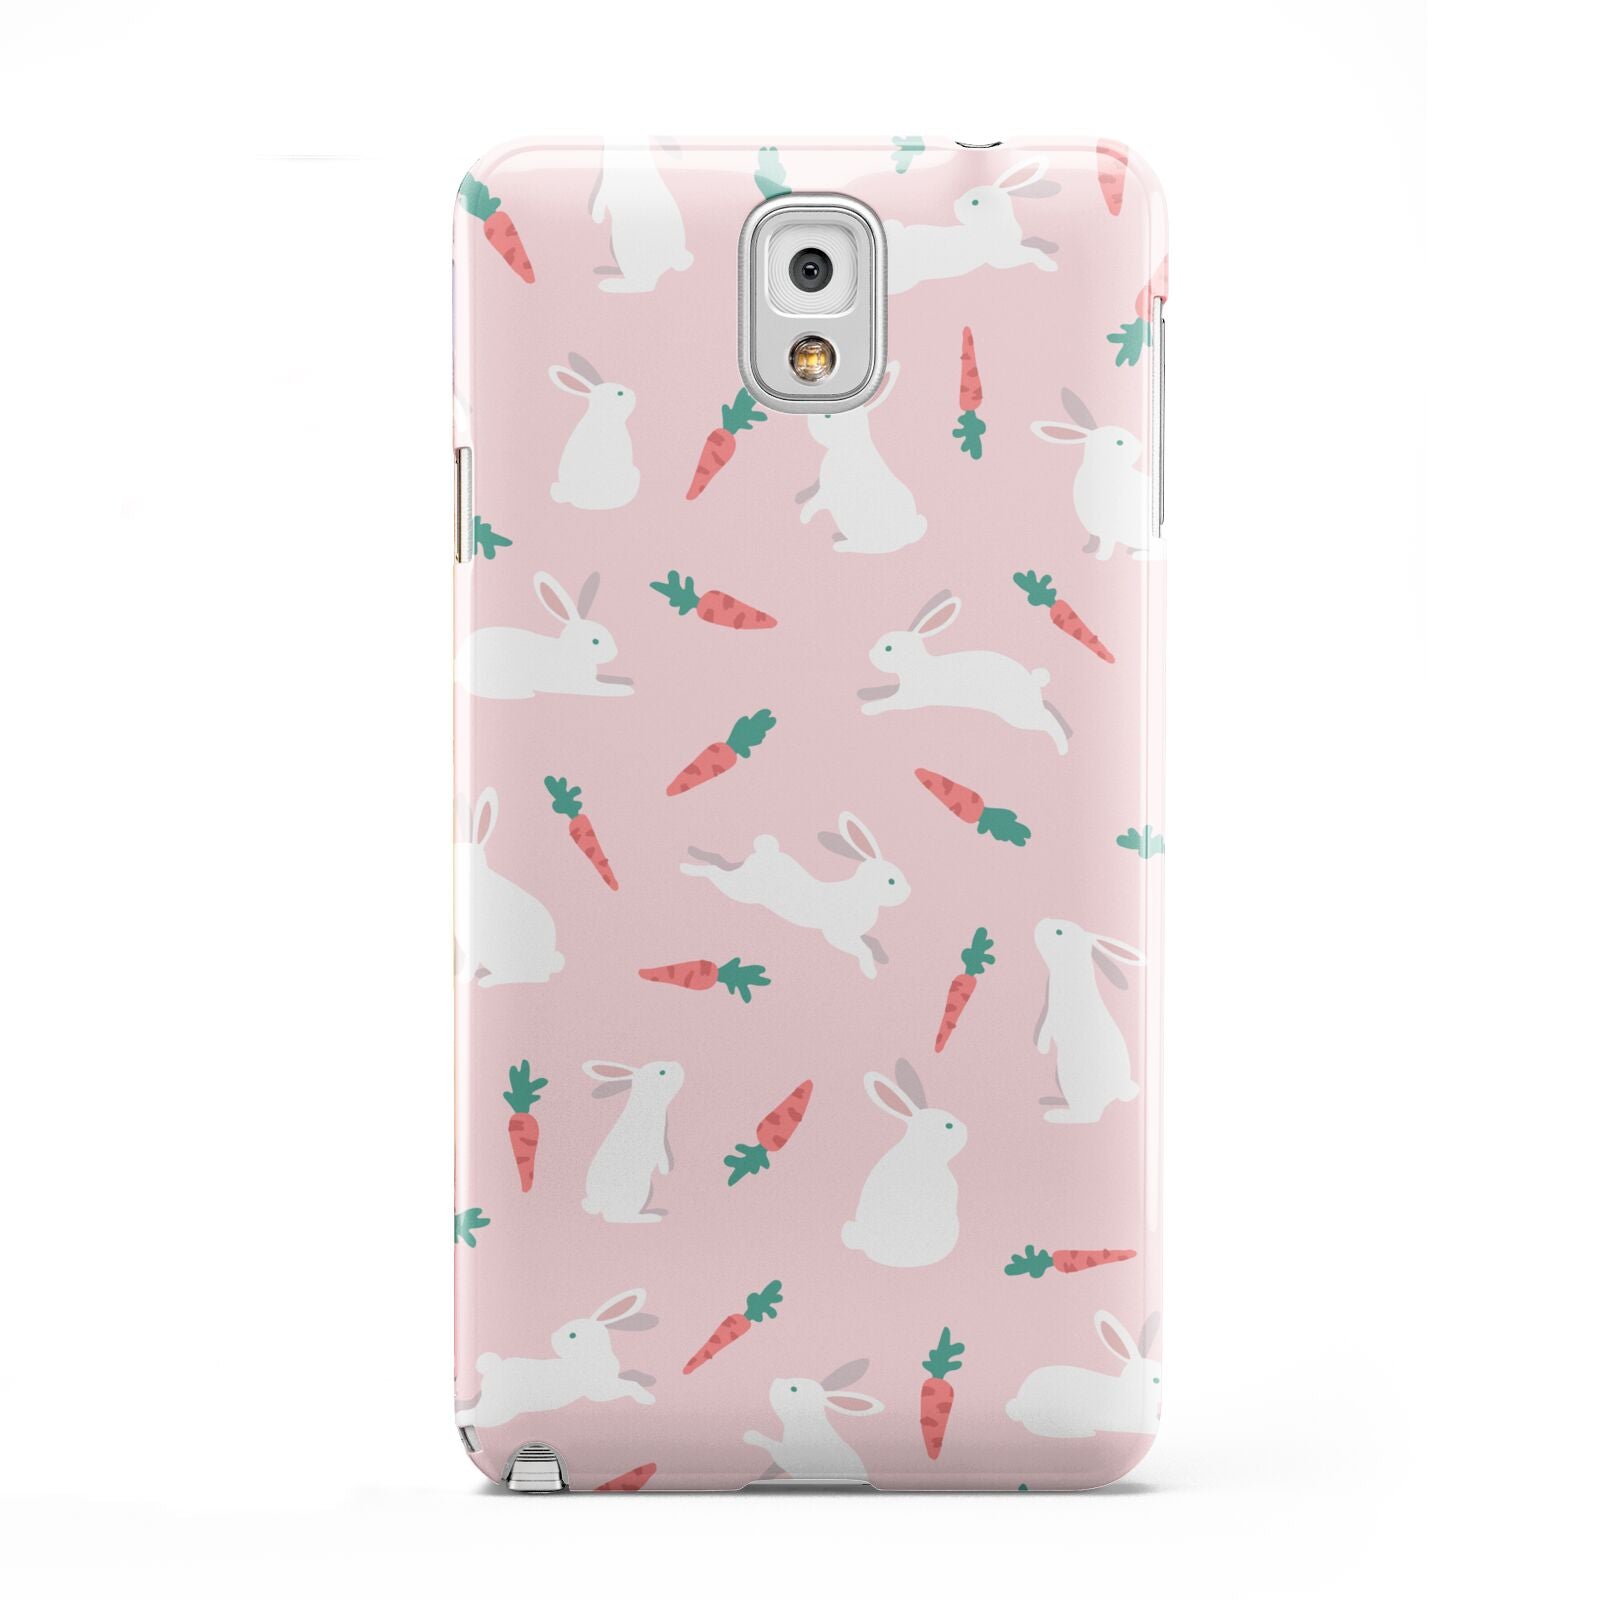 Easter Bunny And Carrot Samsung Galaxy Note 3 Case